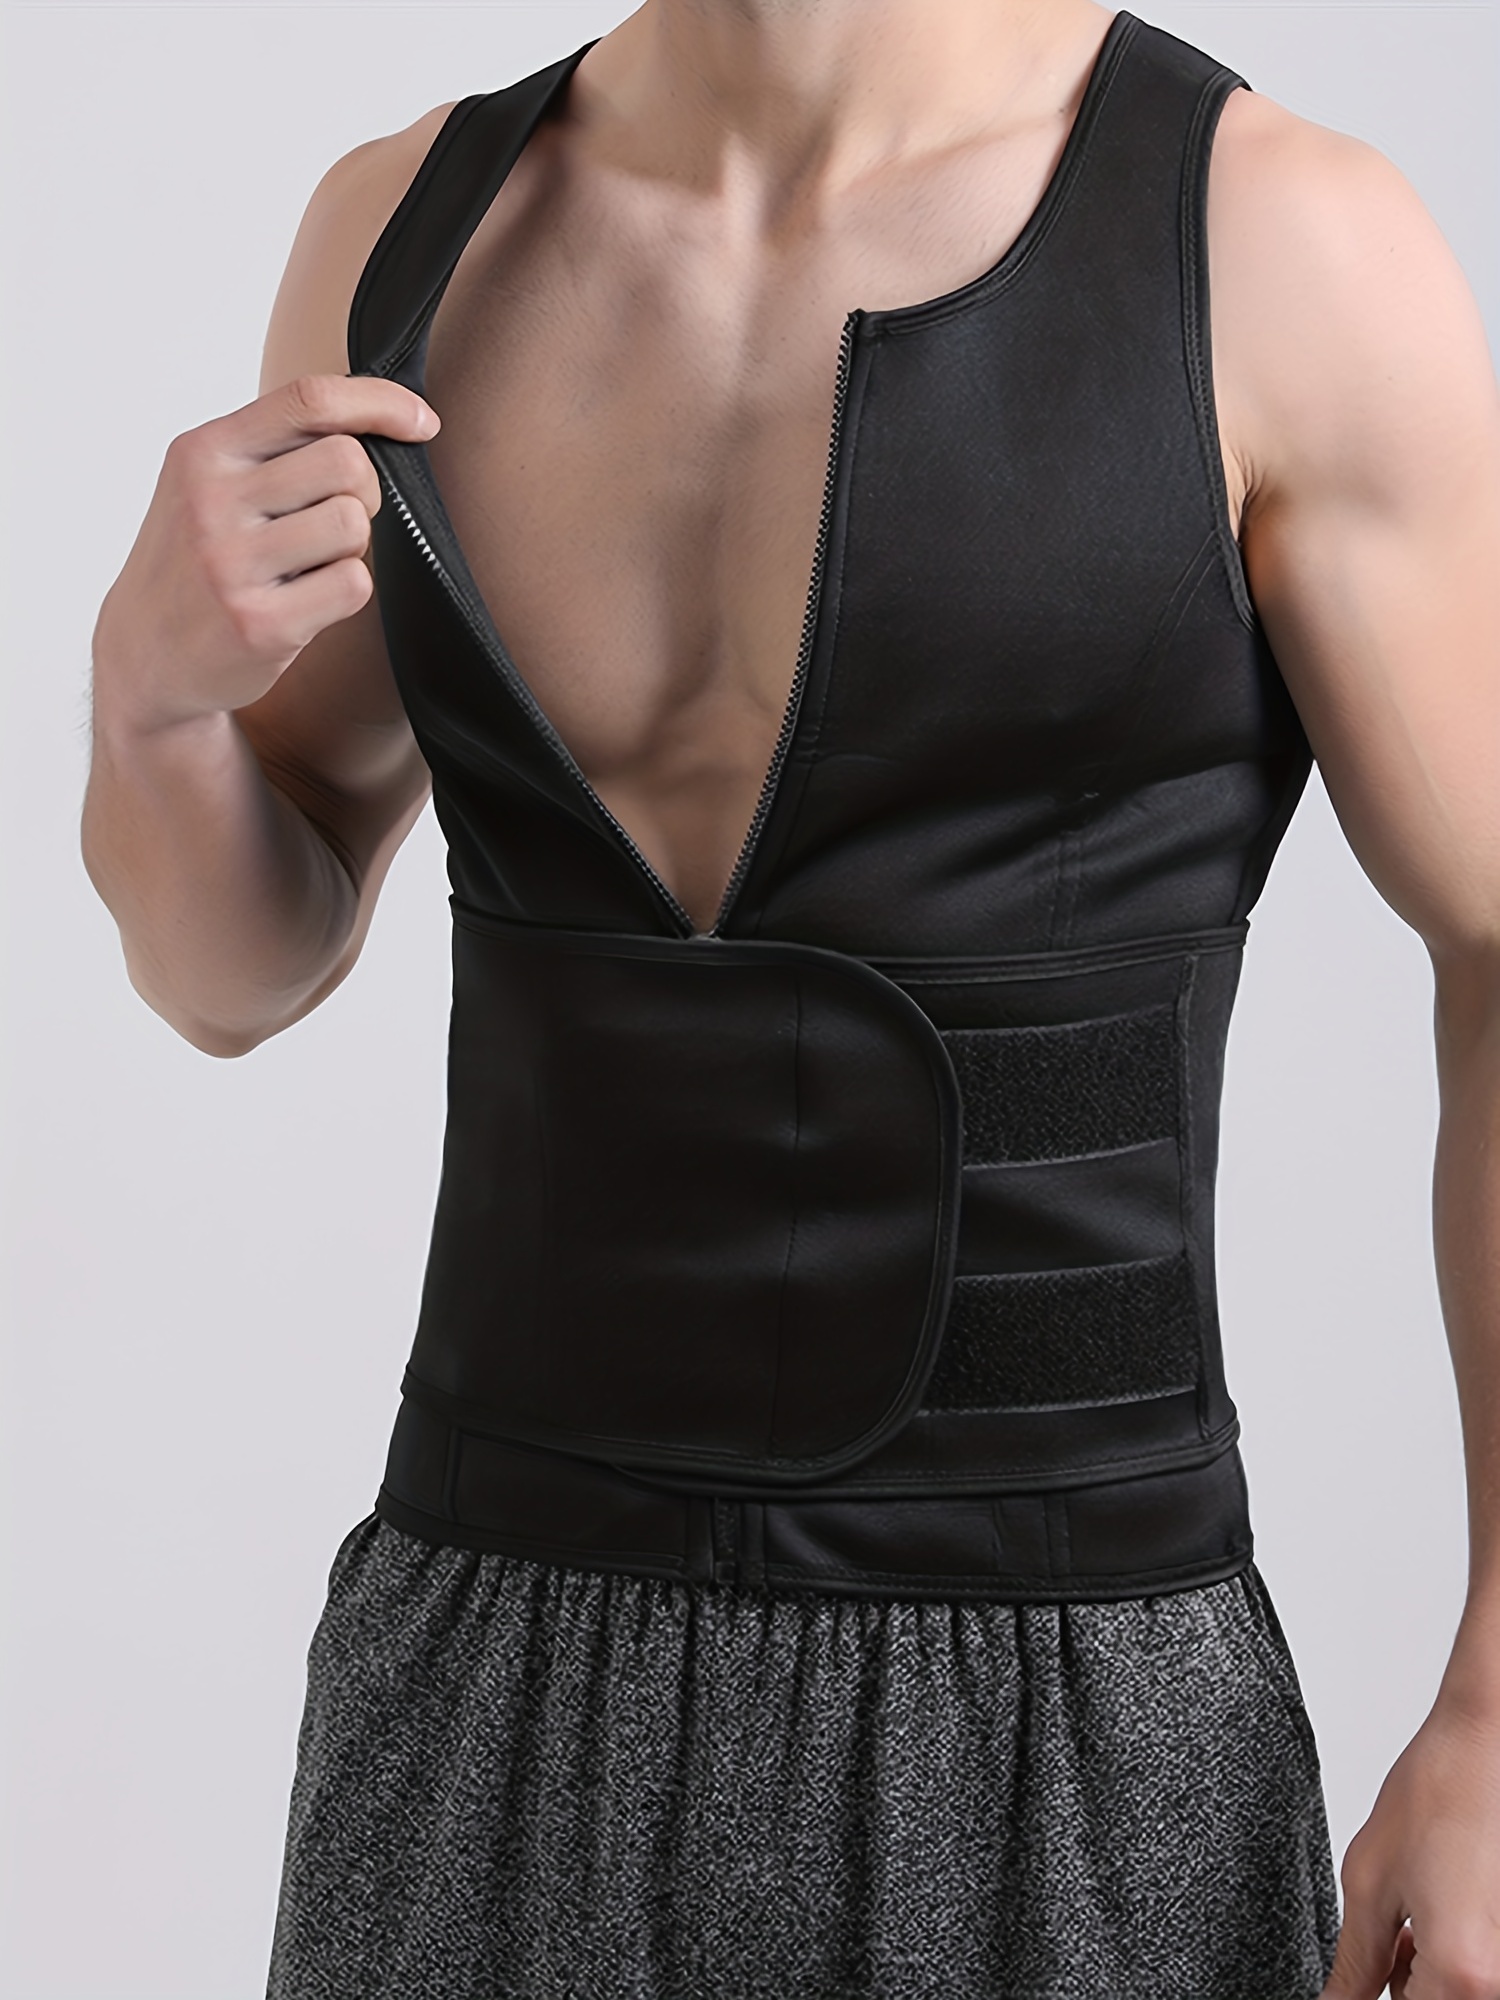 Men's Sweat-Resistant Body Shaper Vest with Reinforced Waist Cincher and  Assorted Colors